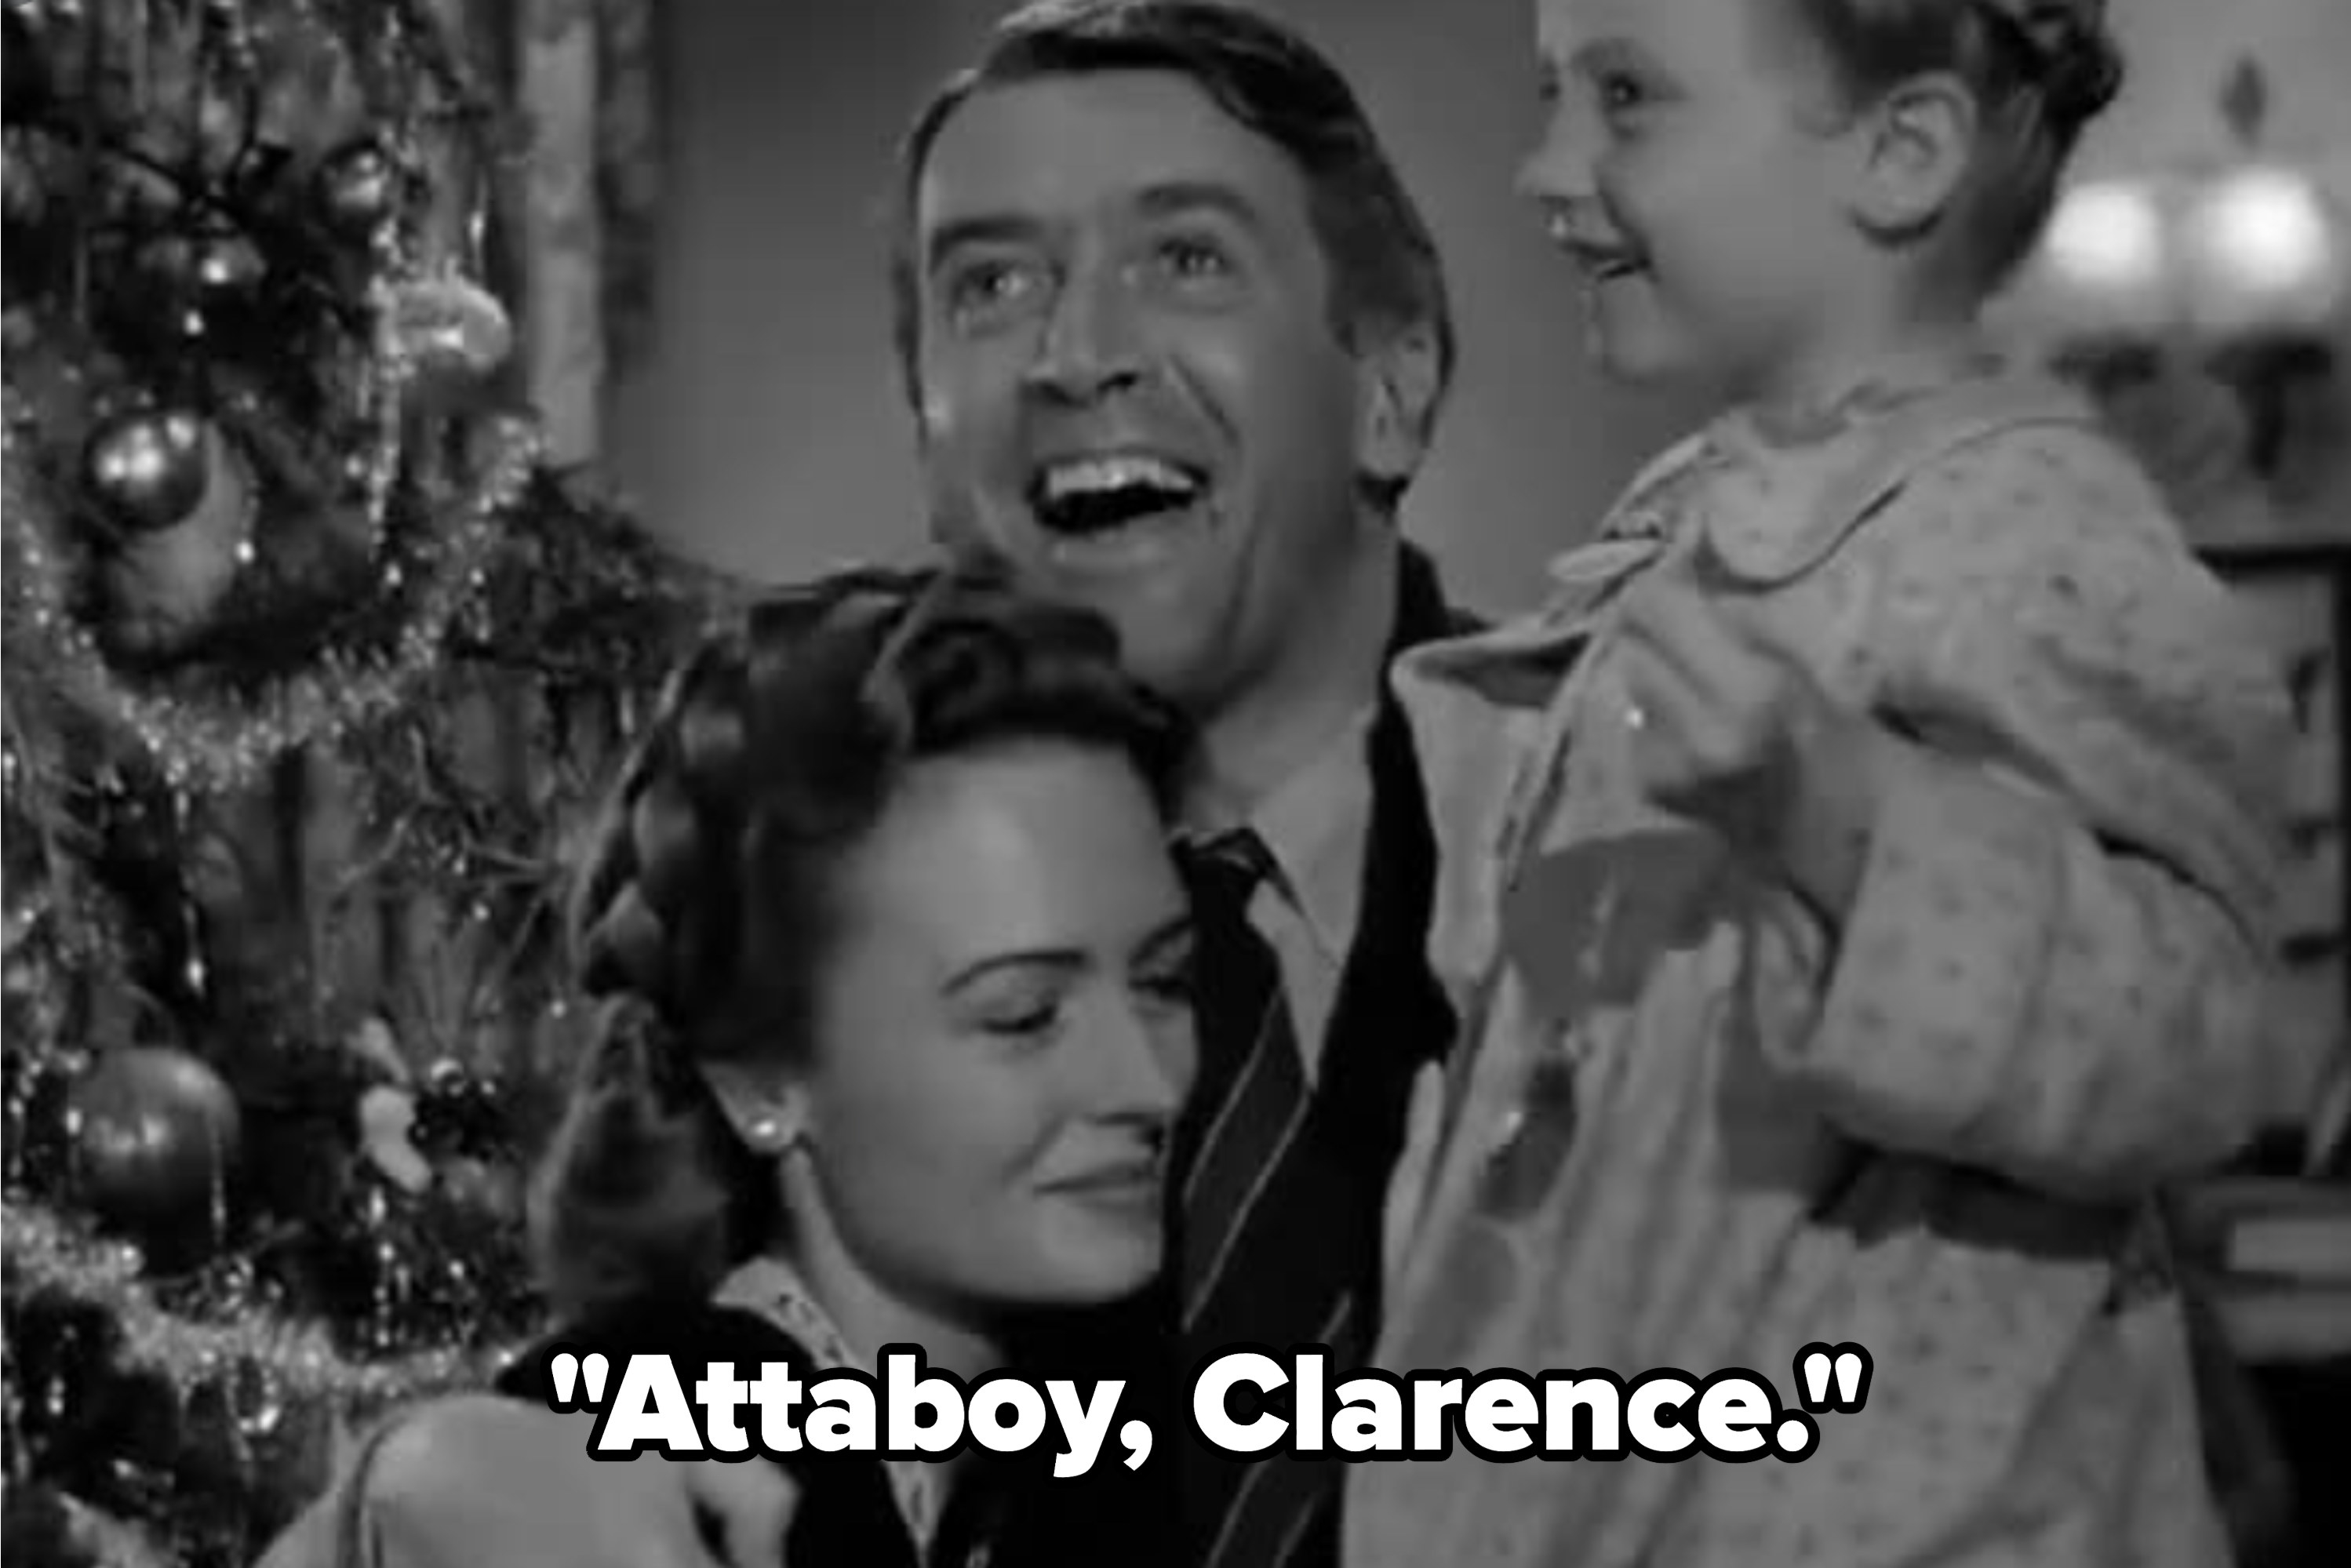 George saying &quot;attaboy, Clarence&quot;